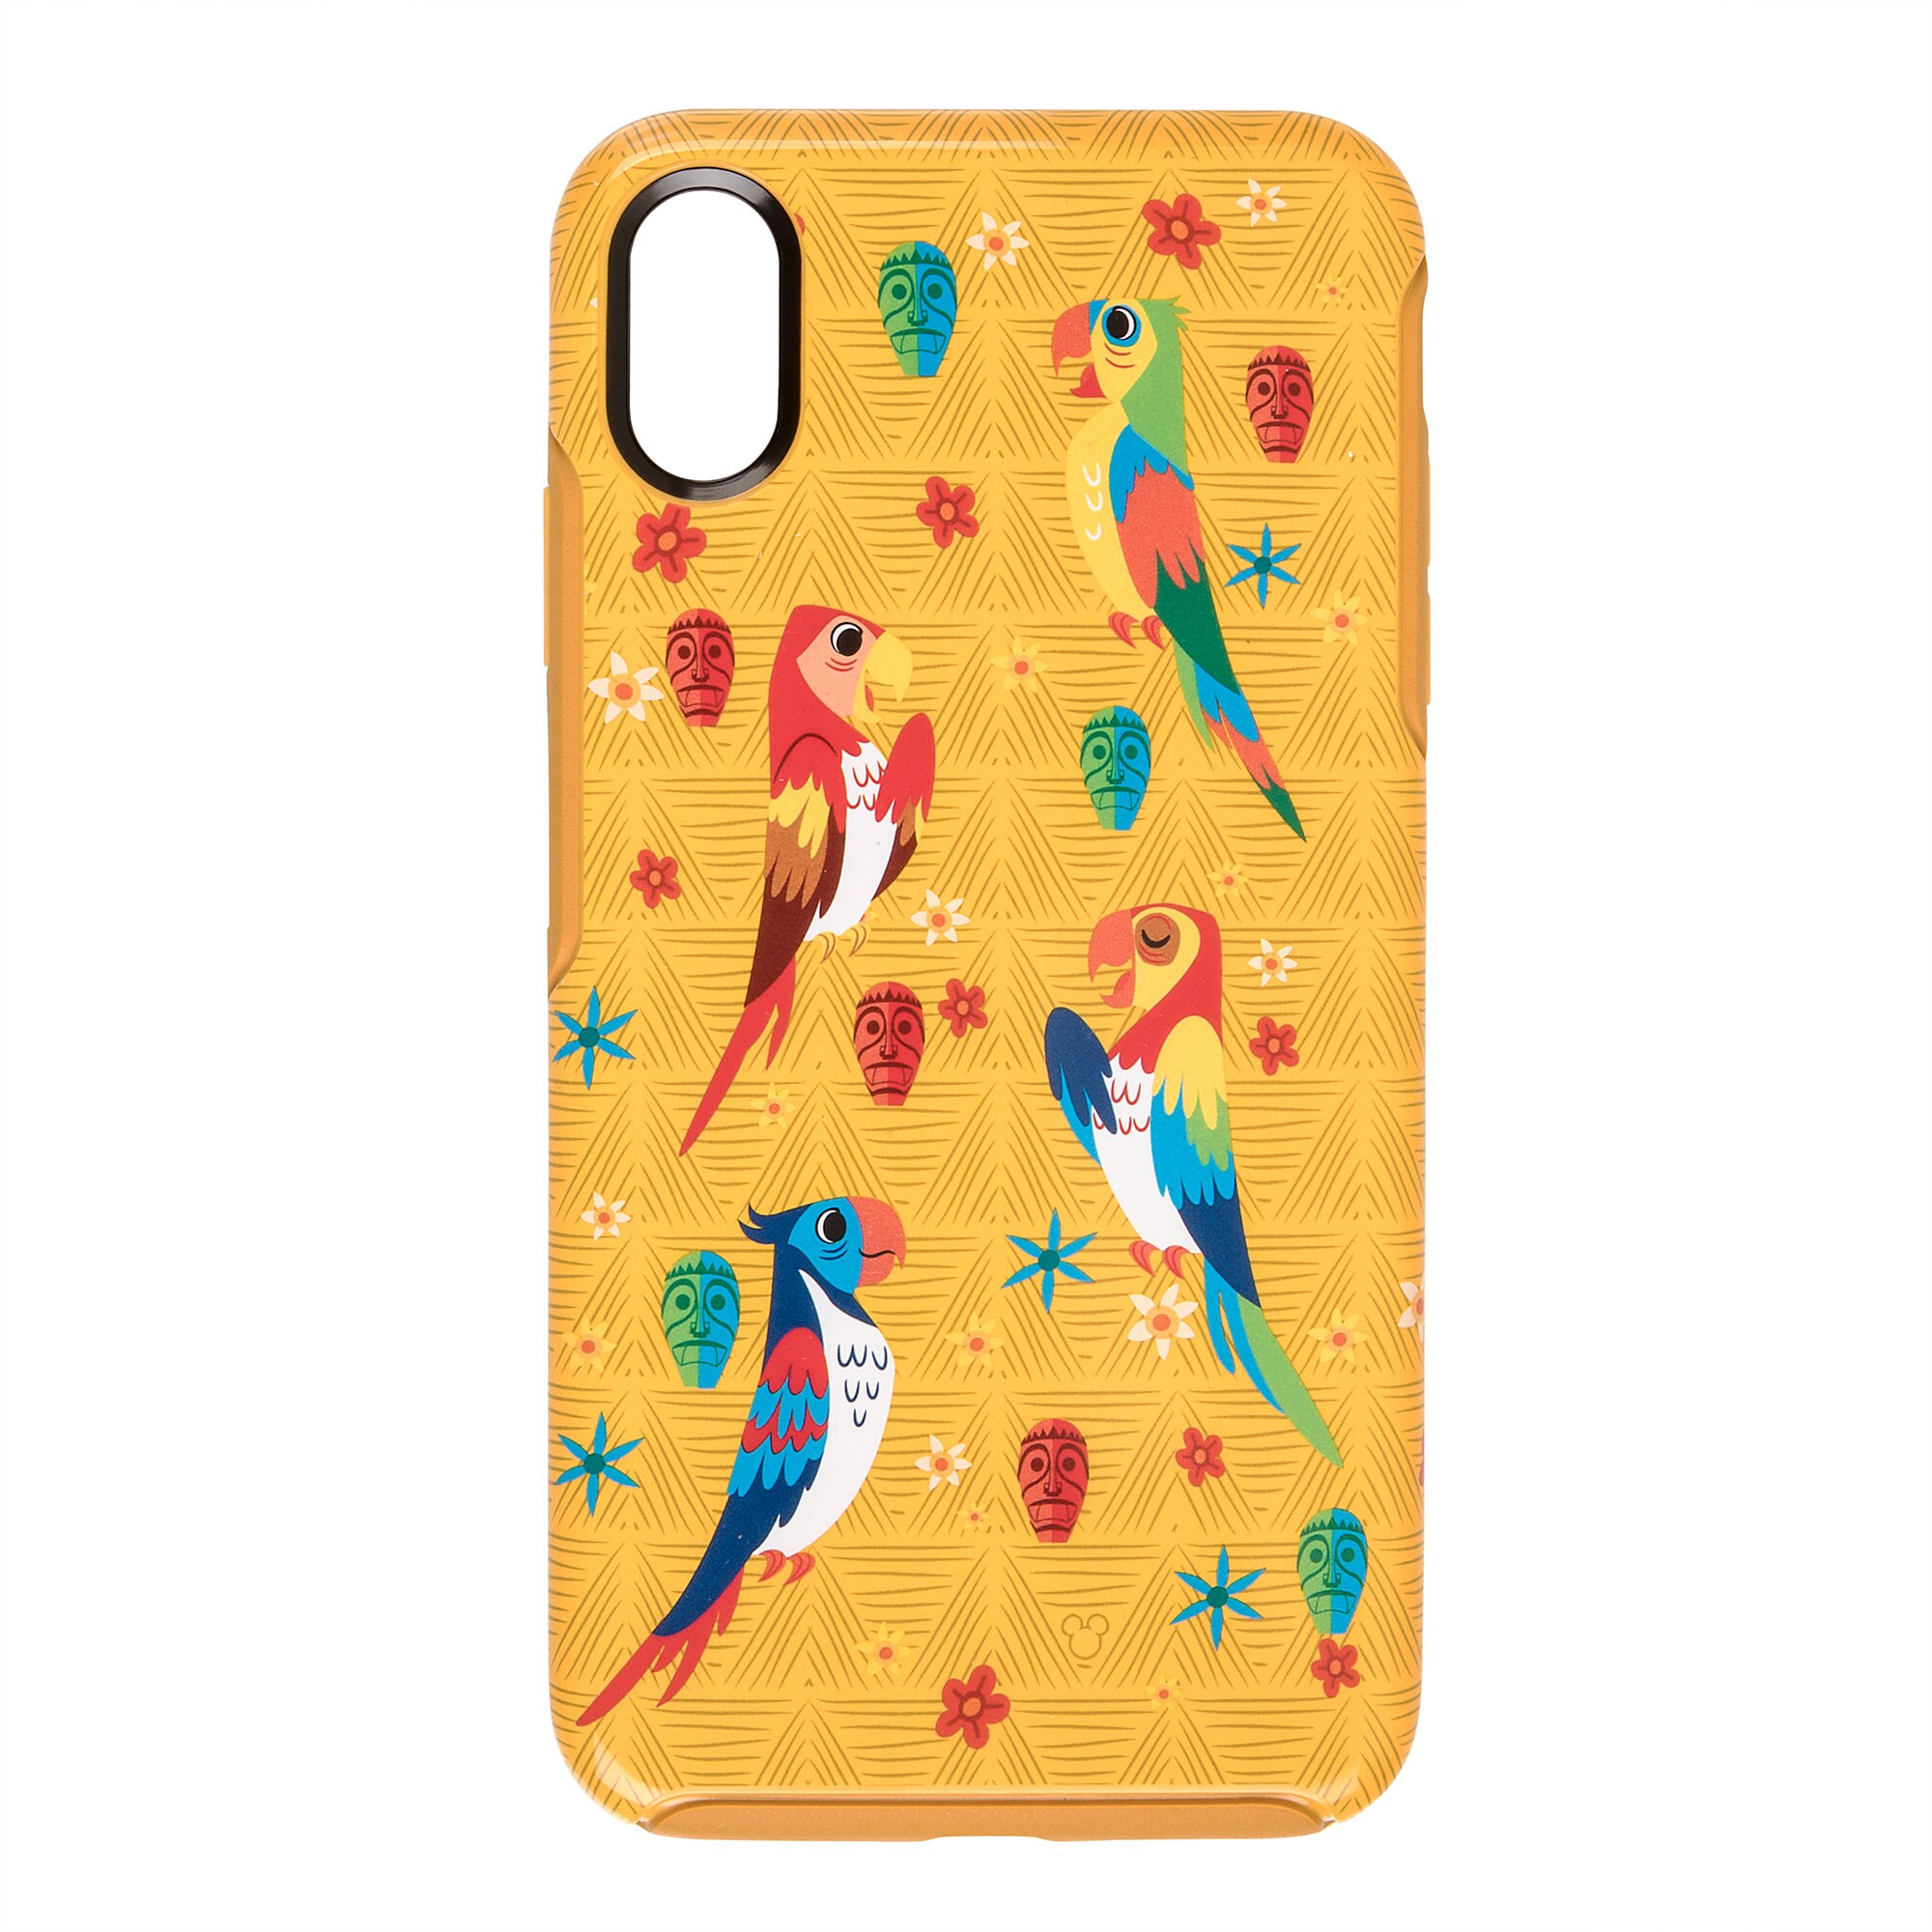 Enchanted Tiki Room iPhone Xs Max Case by OtterBox